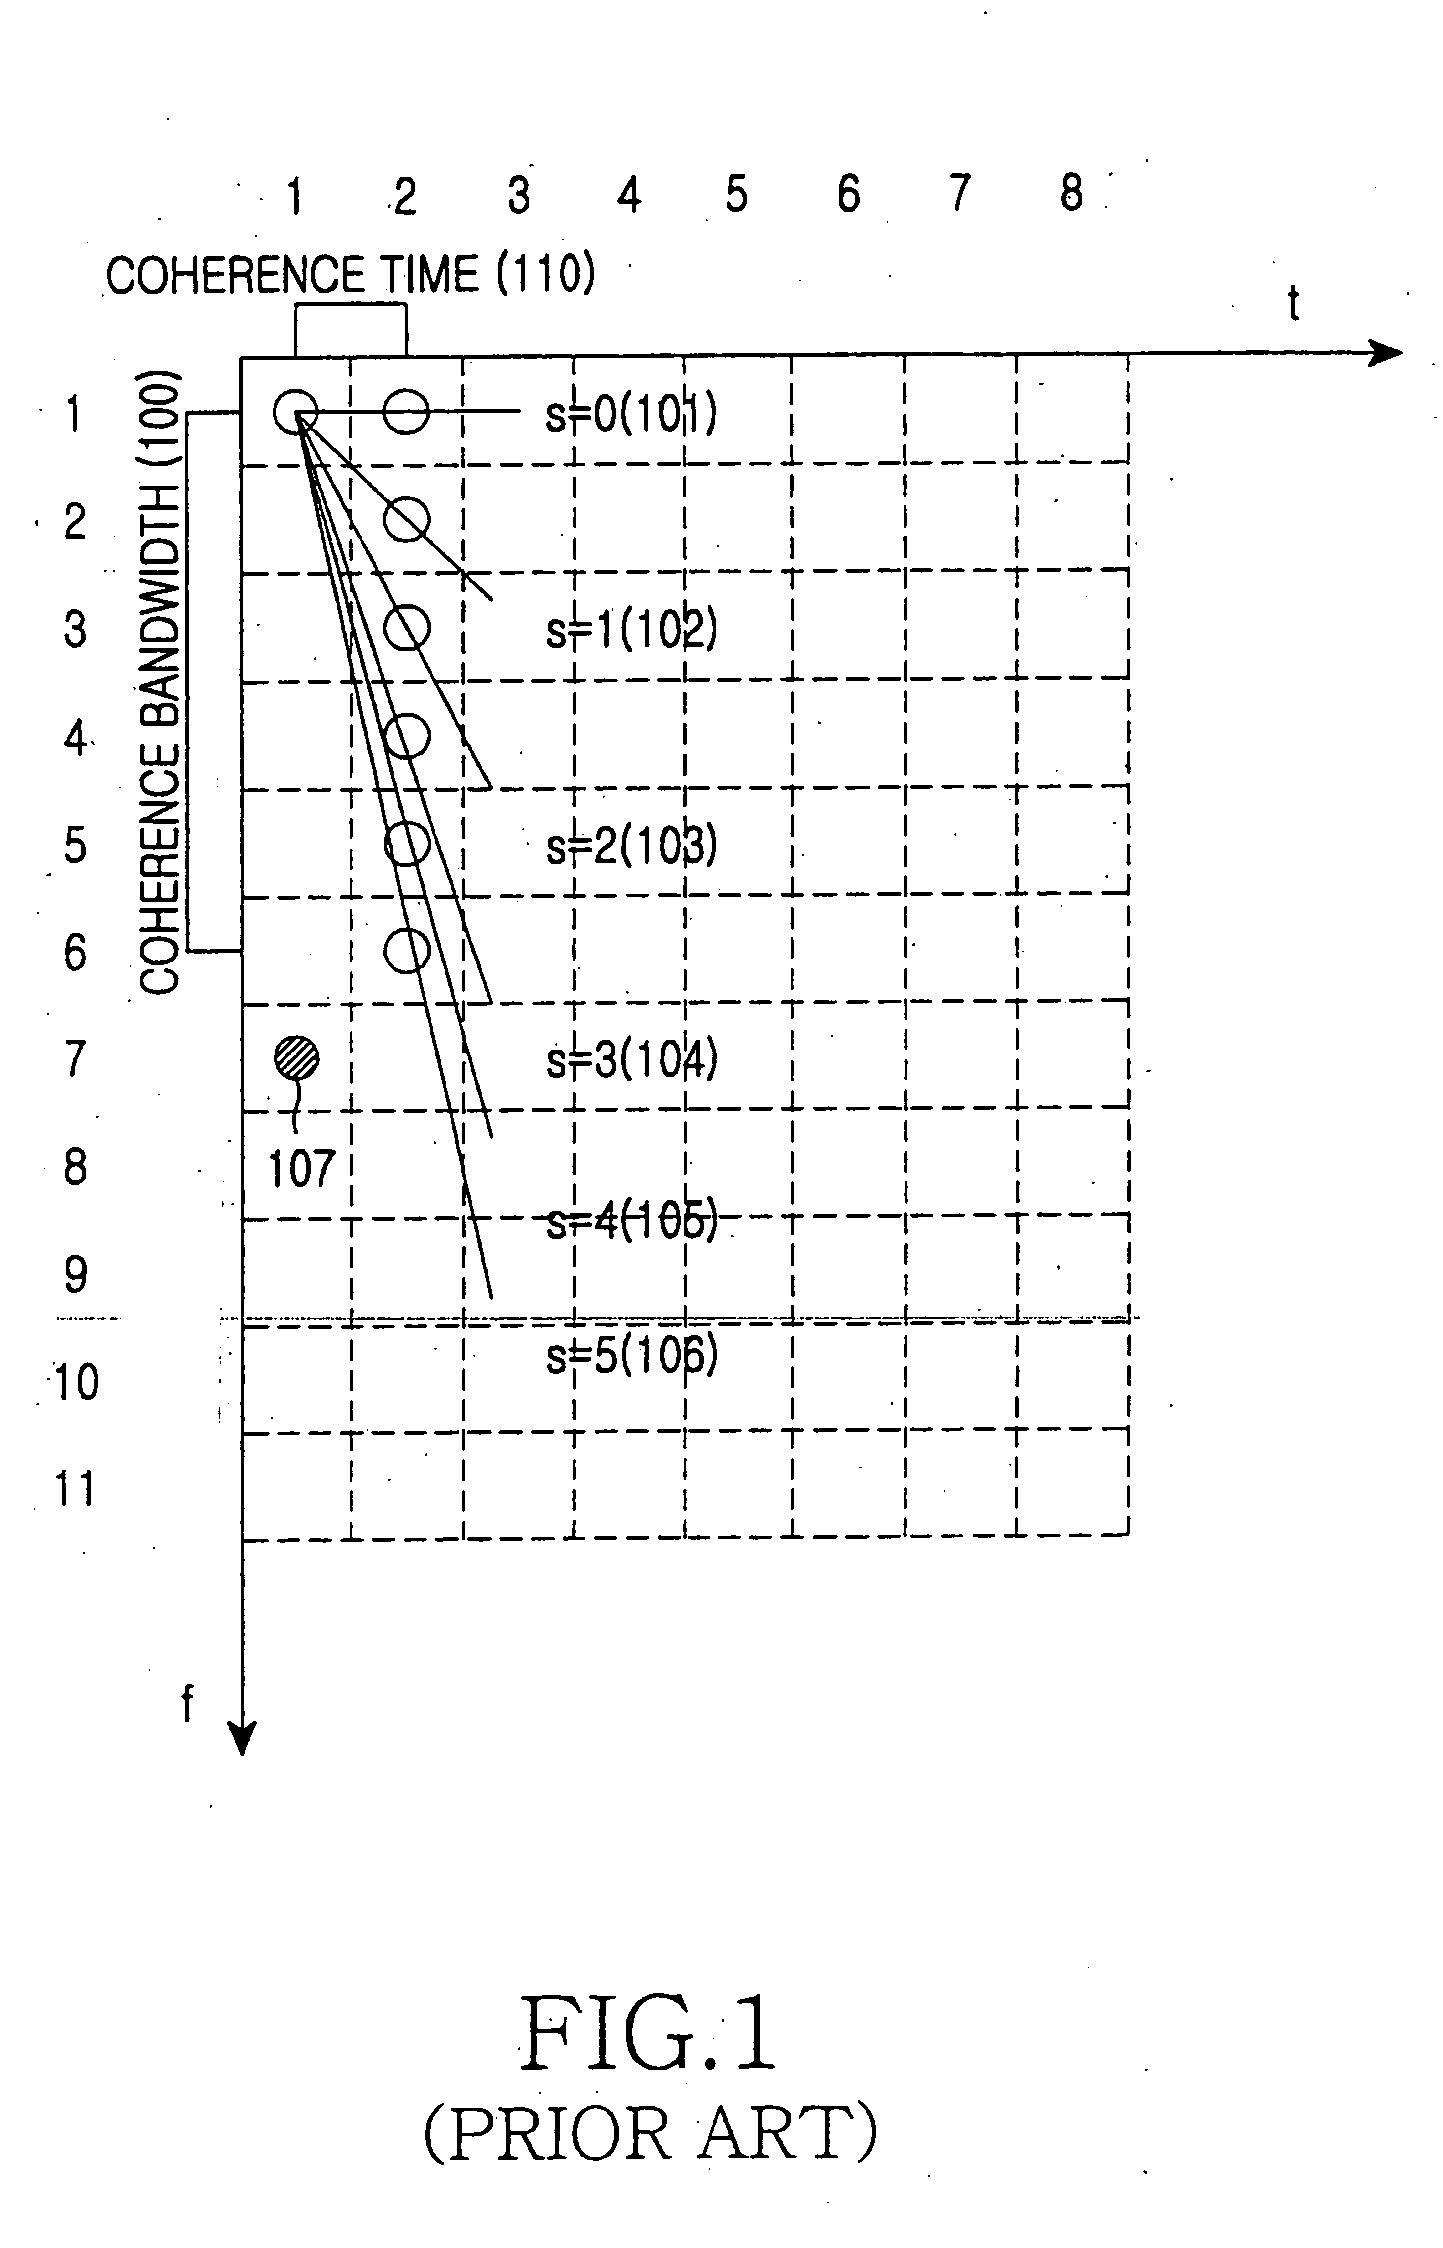 Apparatus and method for transmitting/receiving pilot signals in a communication system using an orthogonal frequency division multiplexing scheme